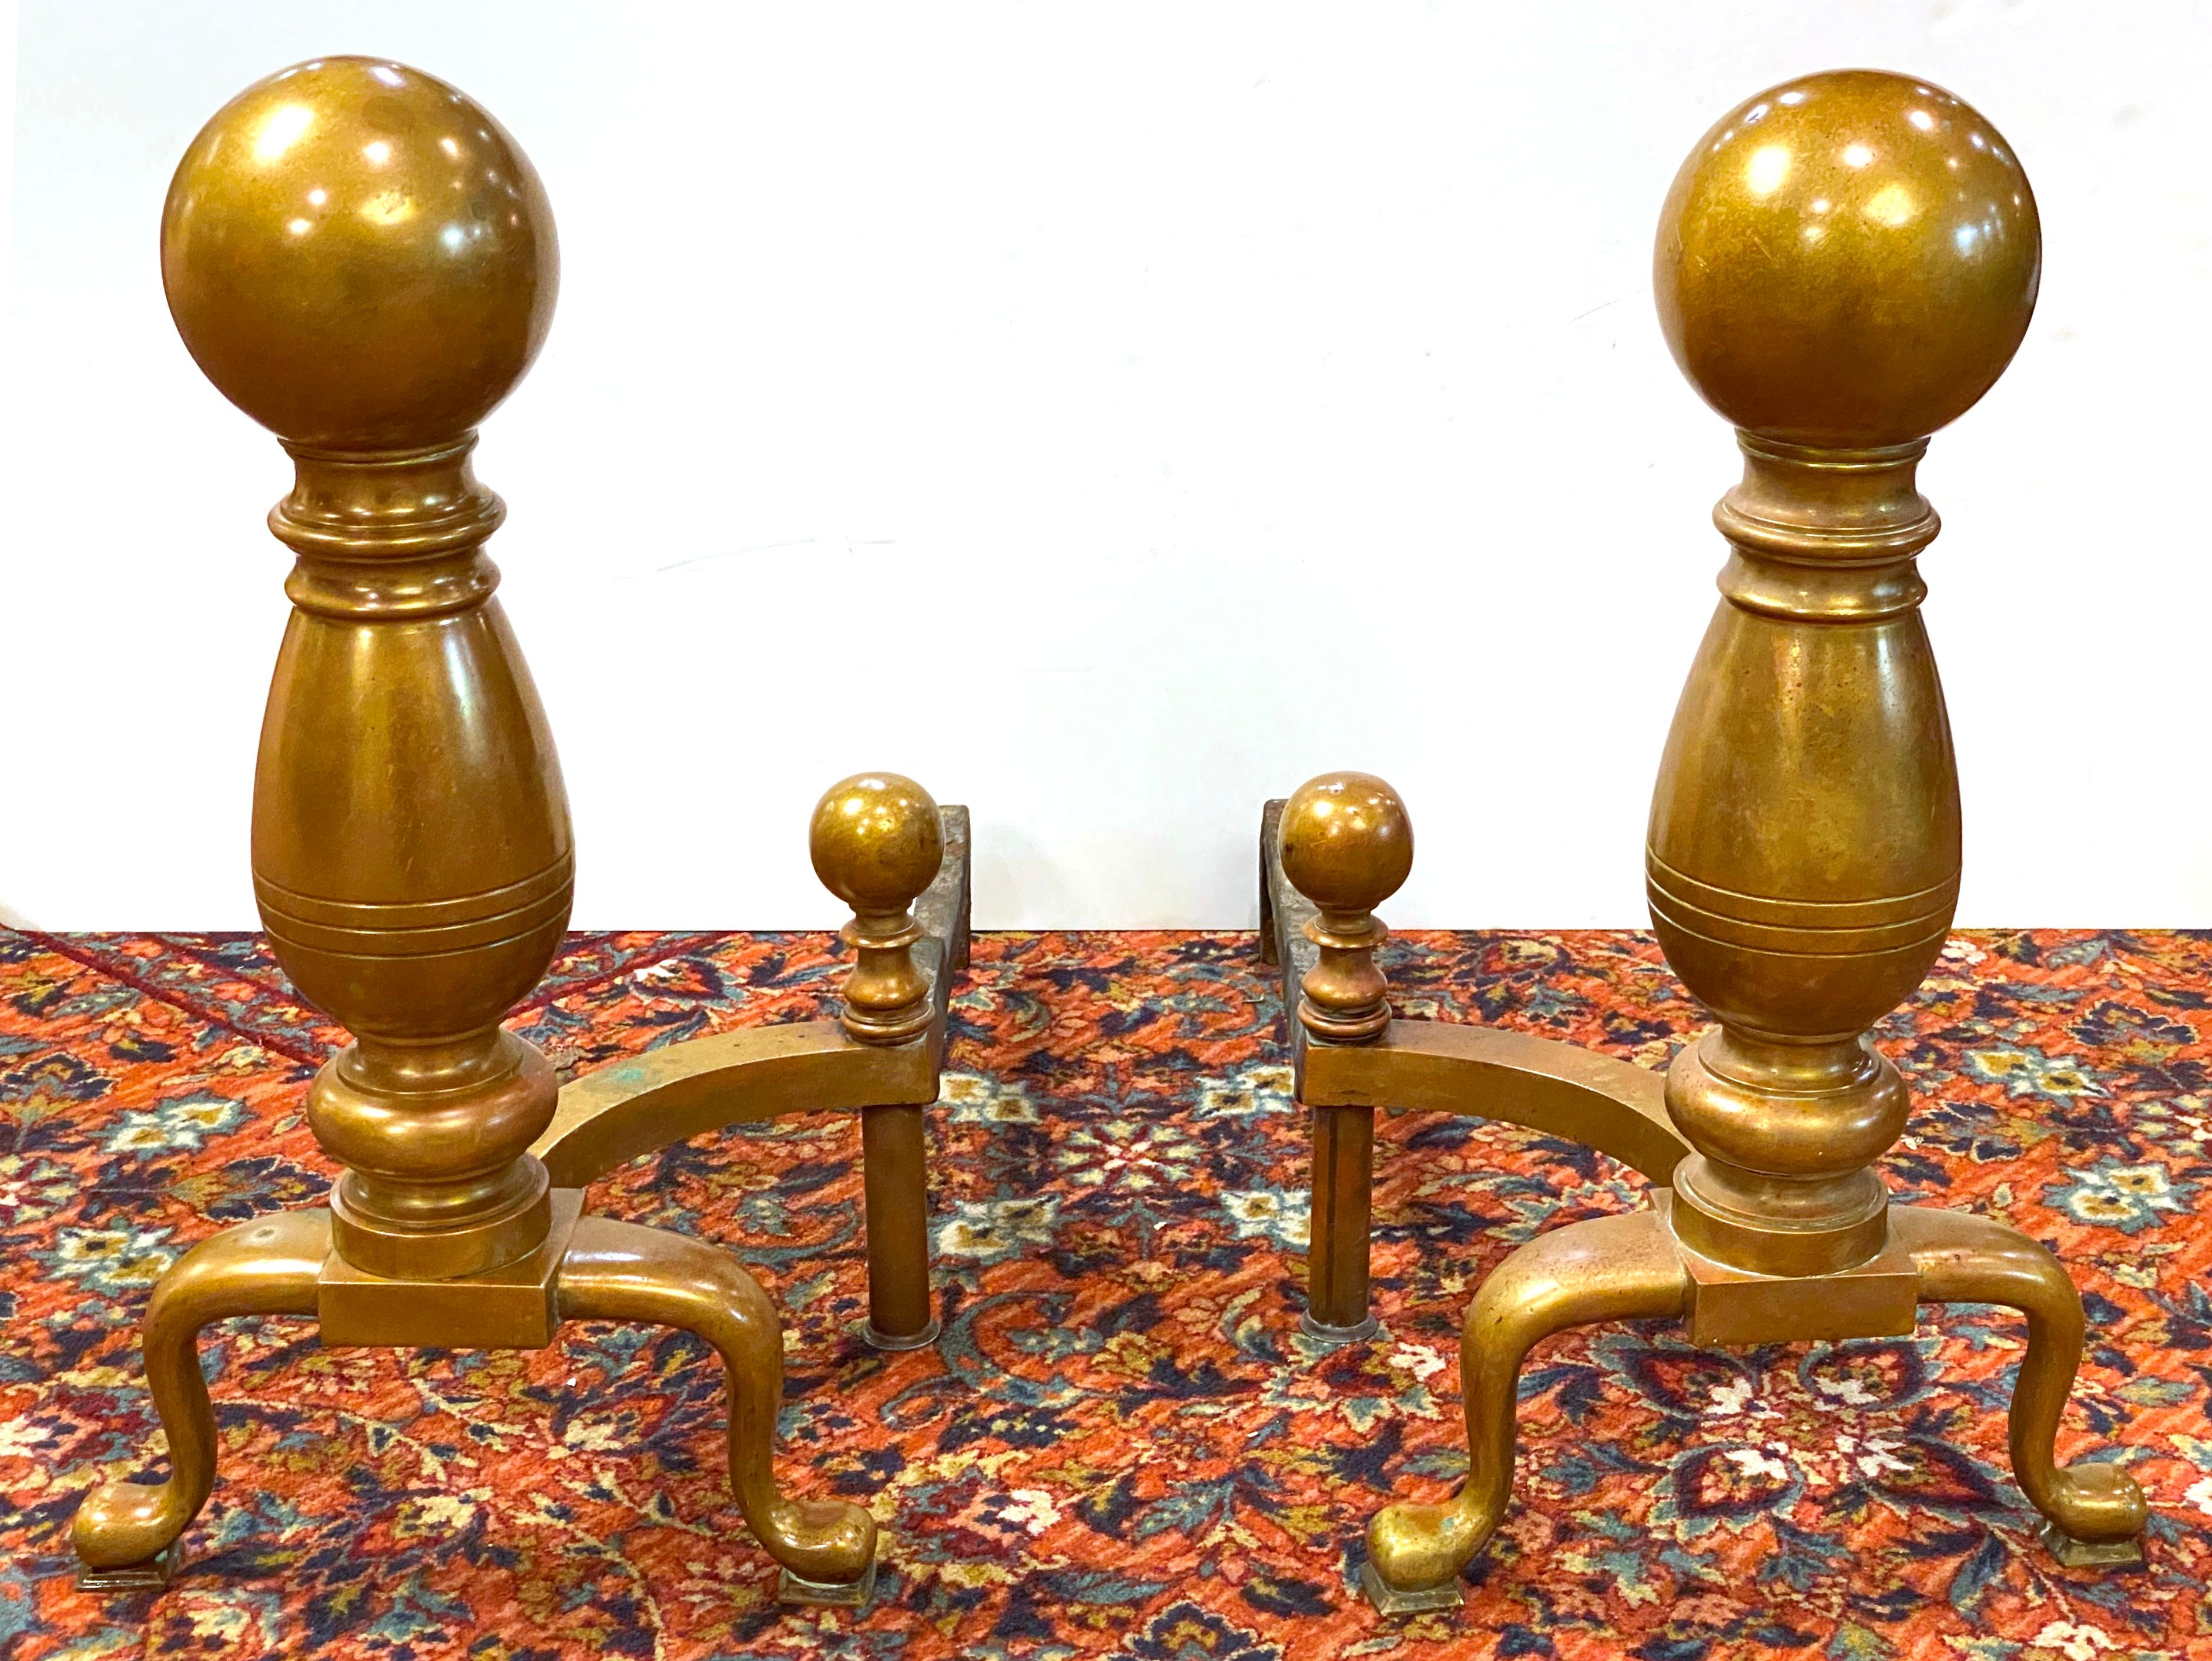 American Aesthetic Movement pair of monumental size polished brass andirons, made during the 1880s in the United States. The pair is in great antique condition with age-appropriate wear and use.